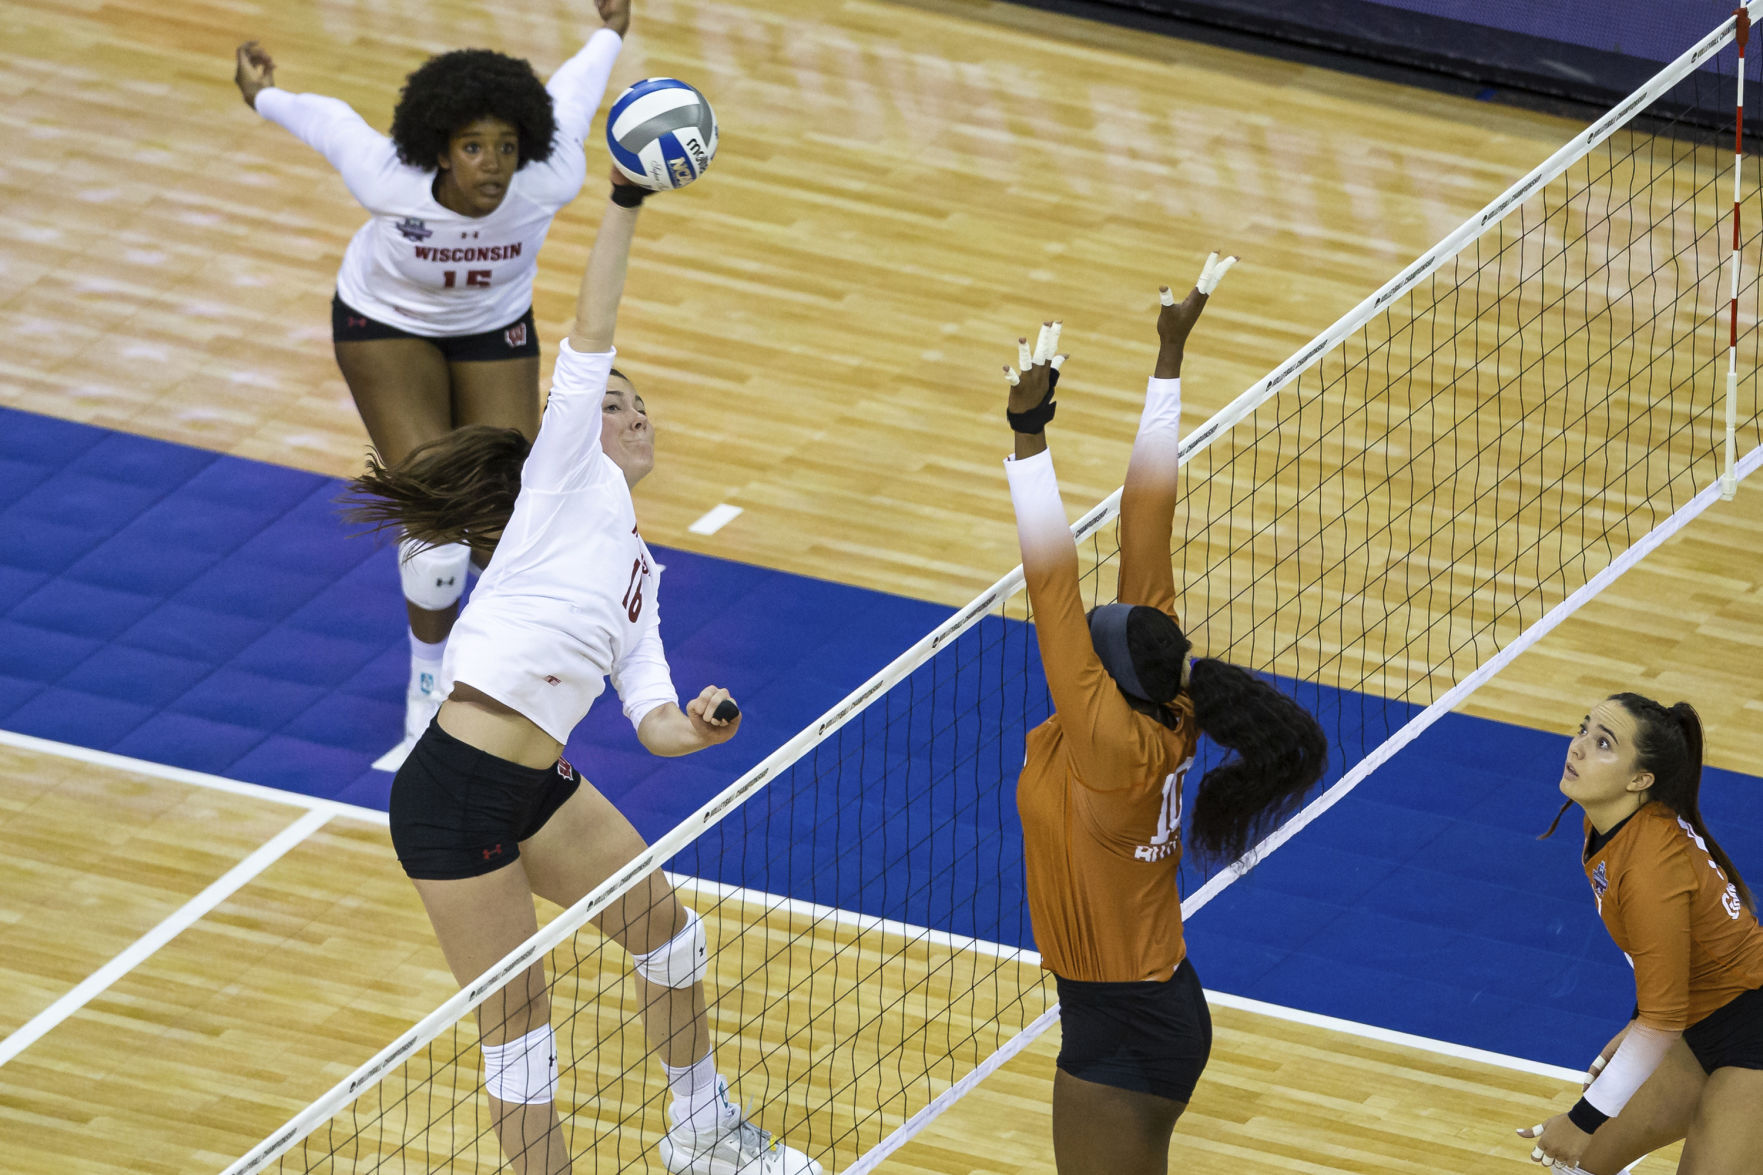 Badgers volleyball team loses key middle blocker Danielle Hart for season